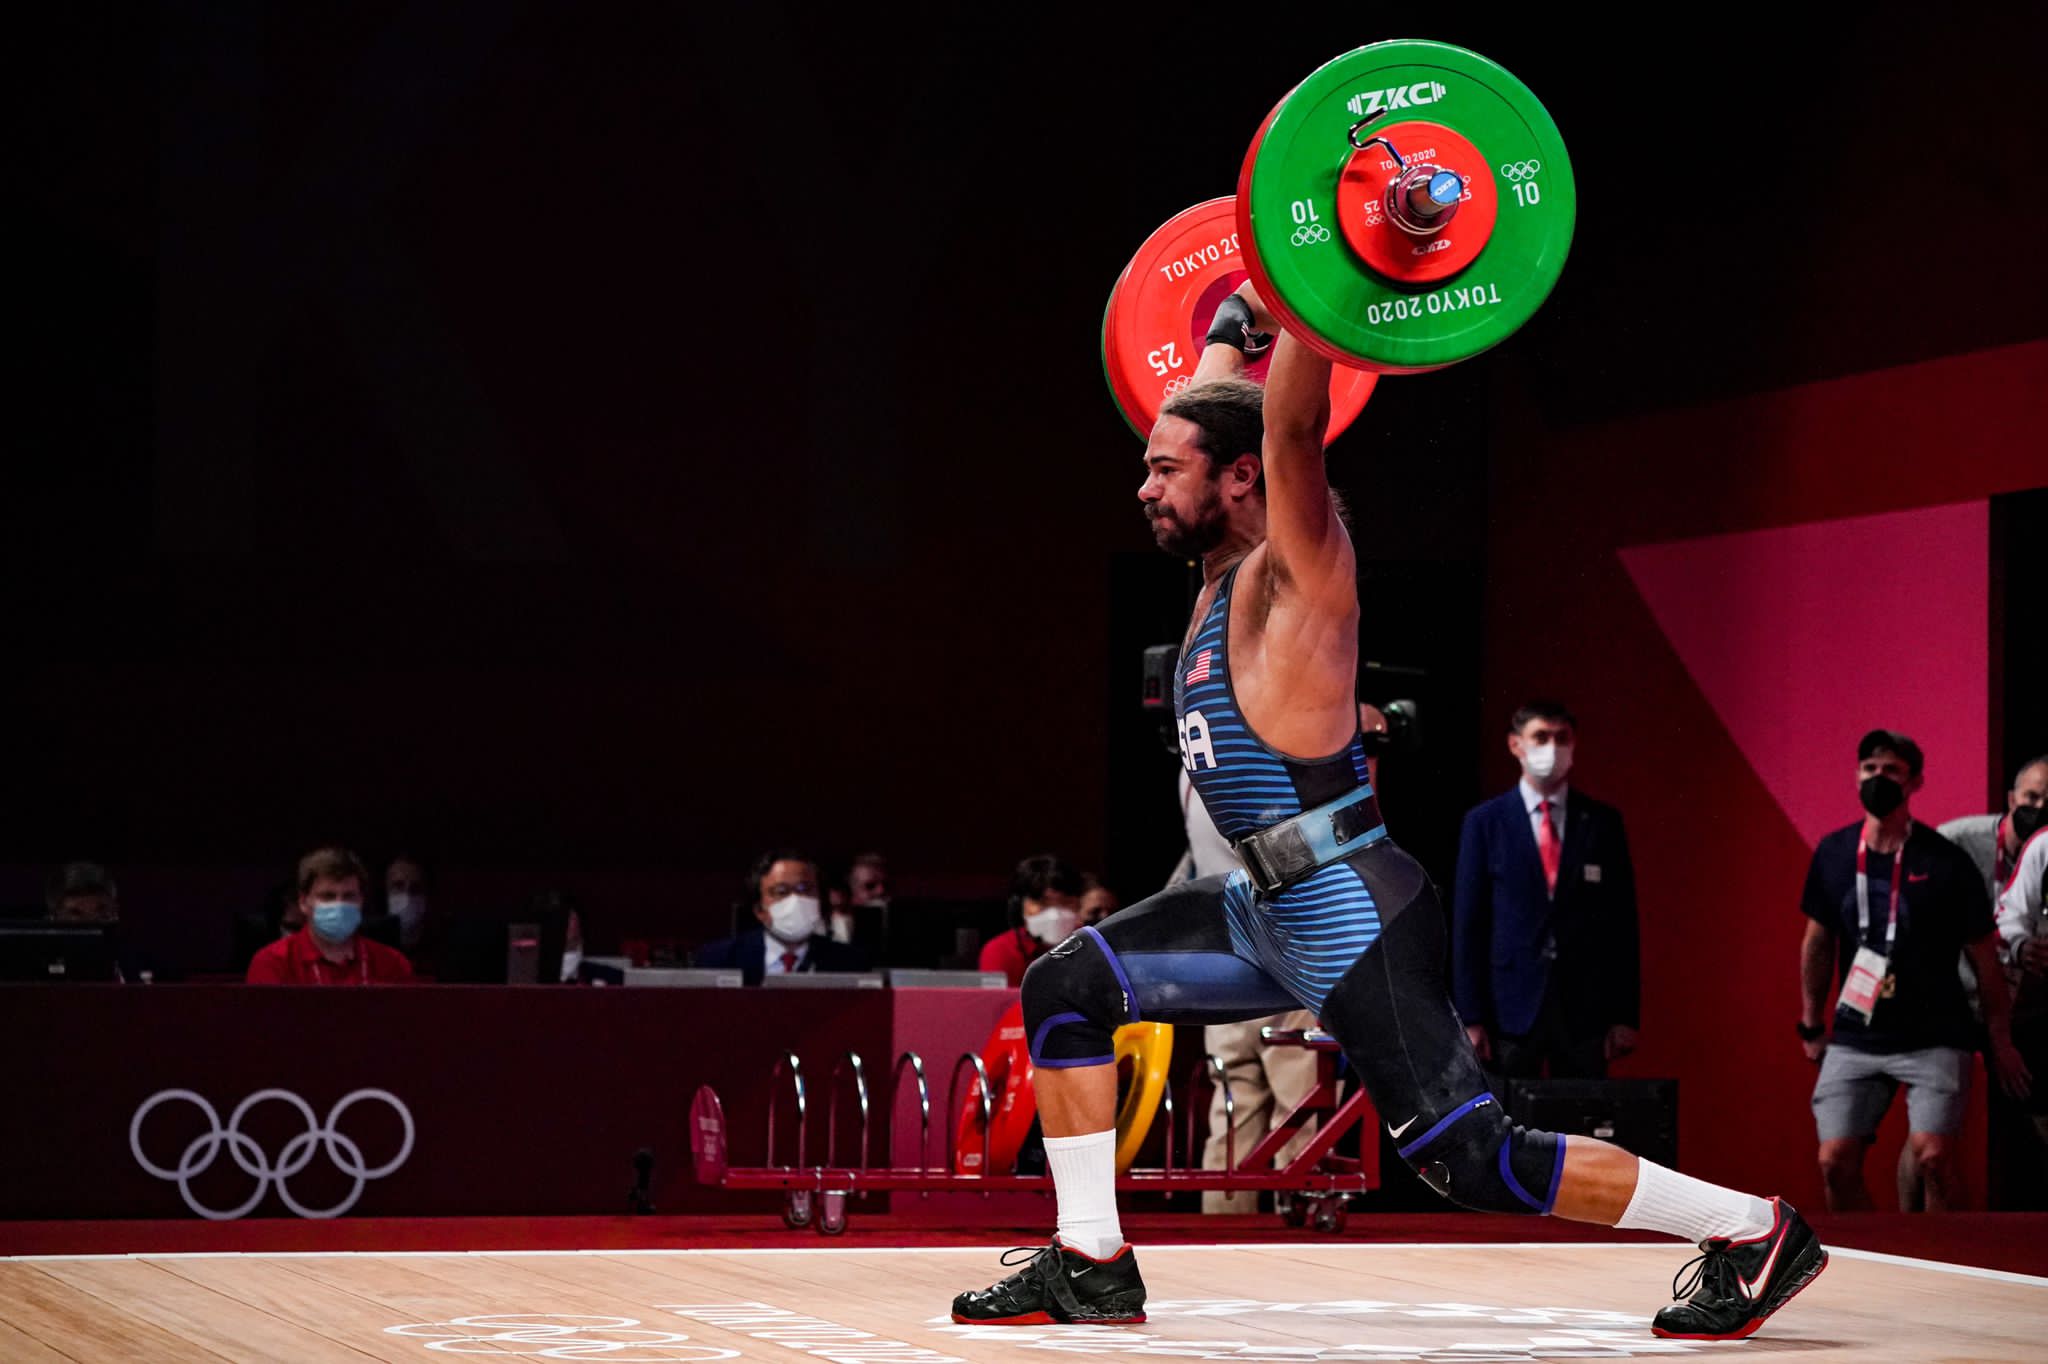 Weightlifter Harrison Maurus hoists a heavy barbell over his head, one leg bent slightly at the knee and the other behind him in a brace position.